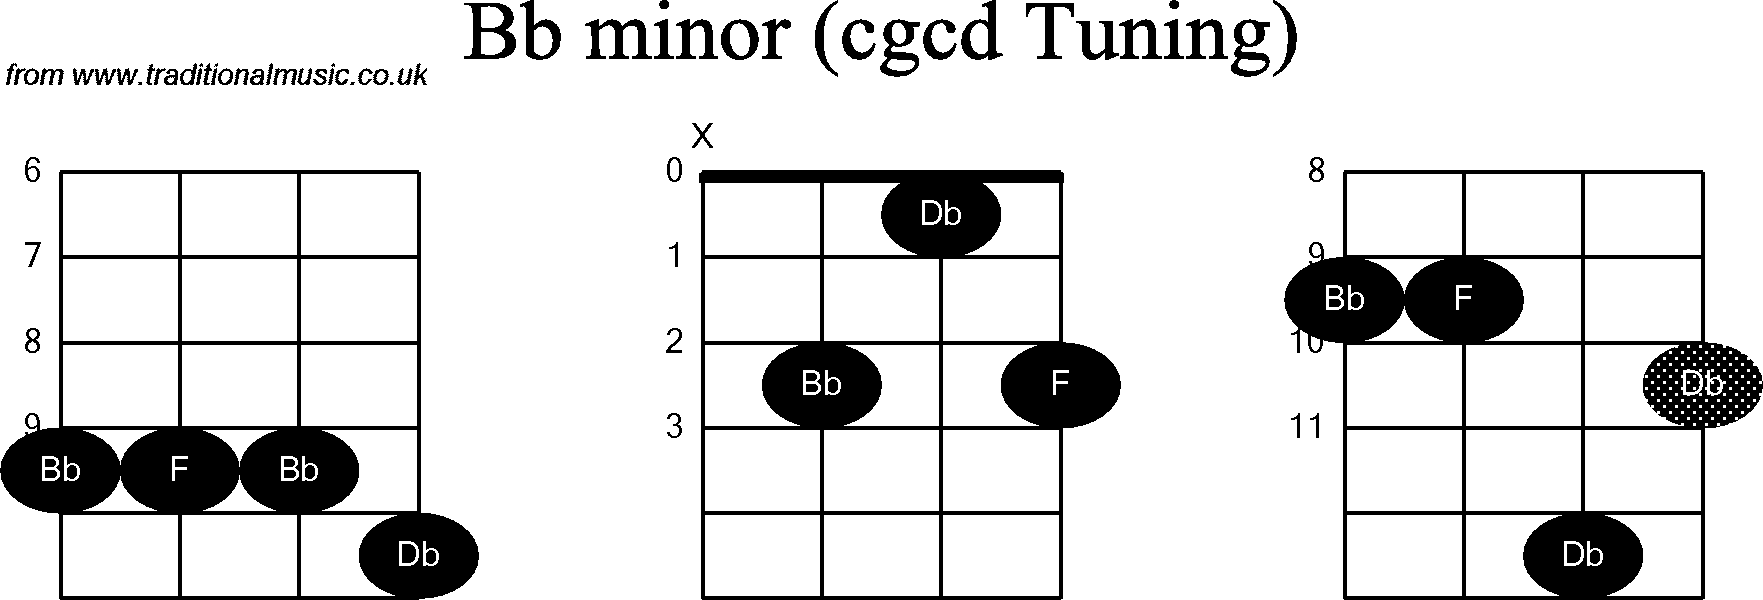 Chord diagrams for Banjo(Double C) Bb Minor